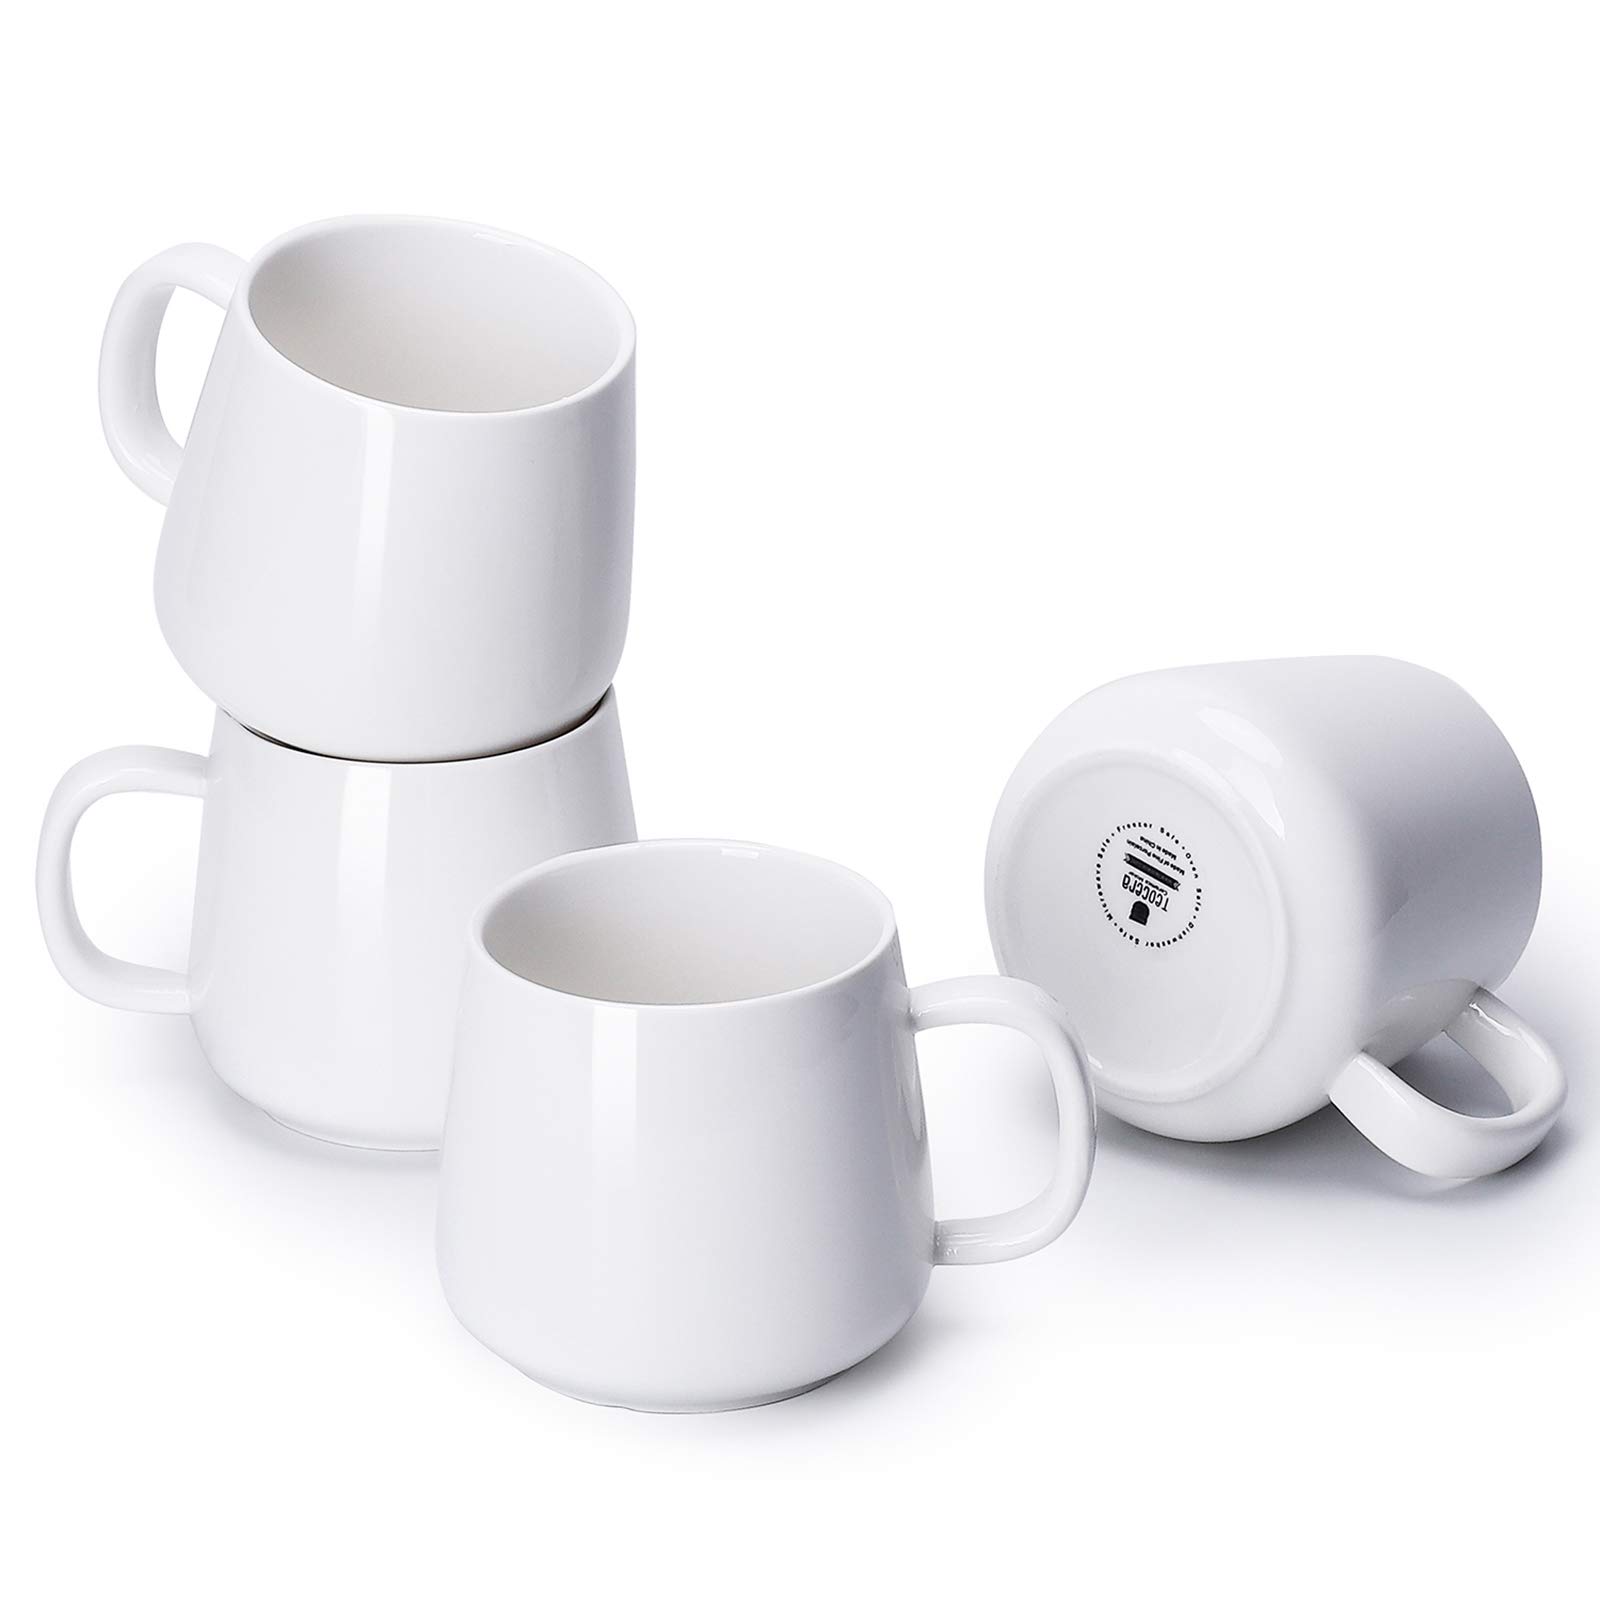 Porcelain Coffee Mugs Set of 4-12 Ounce Cups with Handle for Hot or Cold Drinks like Cocoa, Milk, Tea or Water - Smooth Ceramic with Modern Design, White